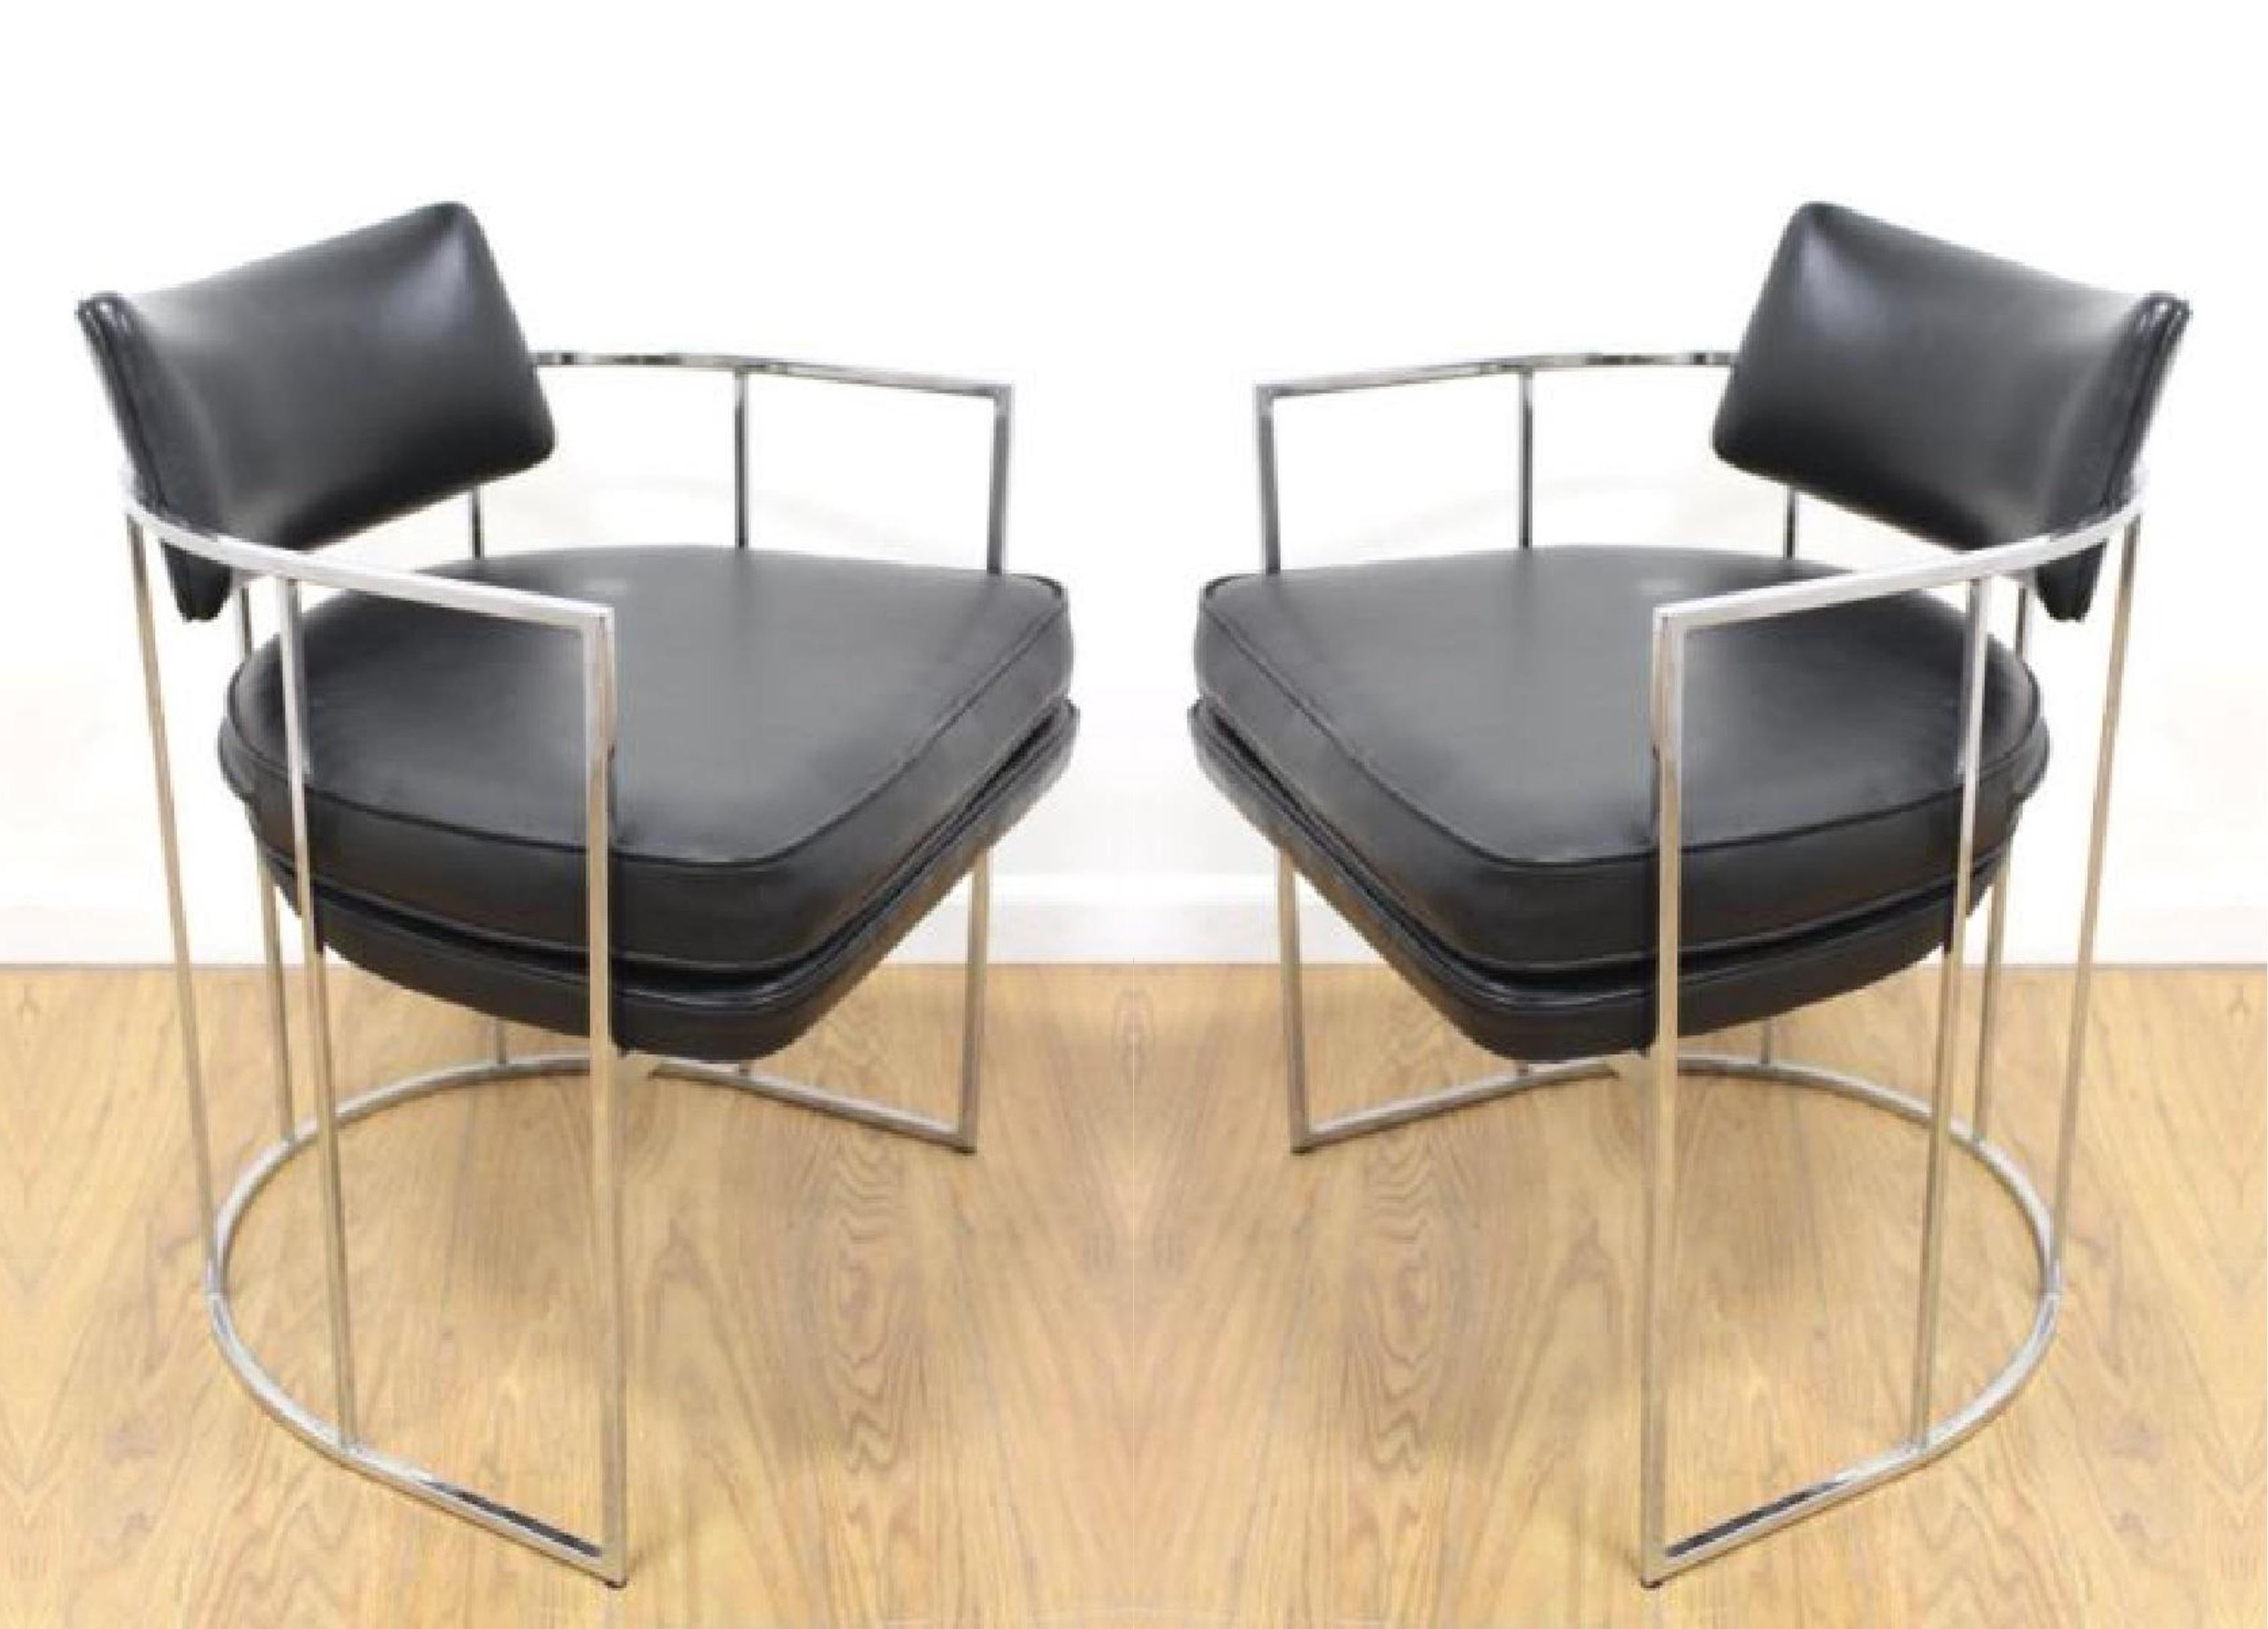 Four chrome Milo Baughman dining chairs for Thayer Coggin. Feature unique ellipse chrome frames with thick padded seating and a tufted floating backrest. Newly upholstered in black.